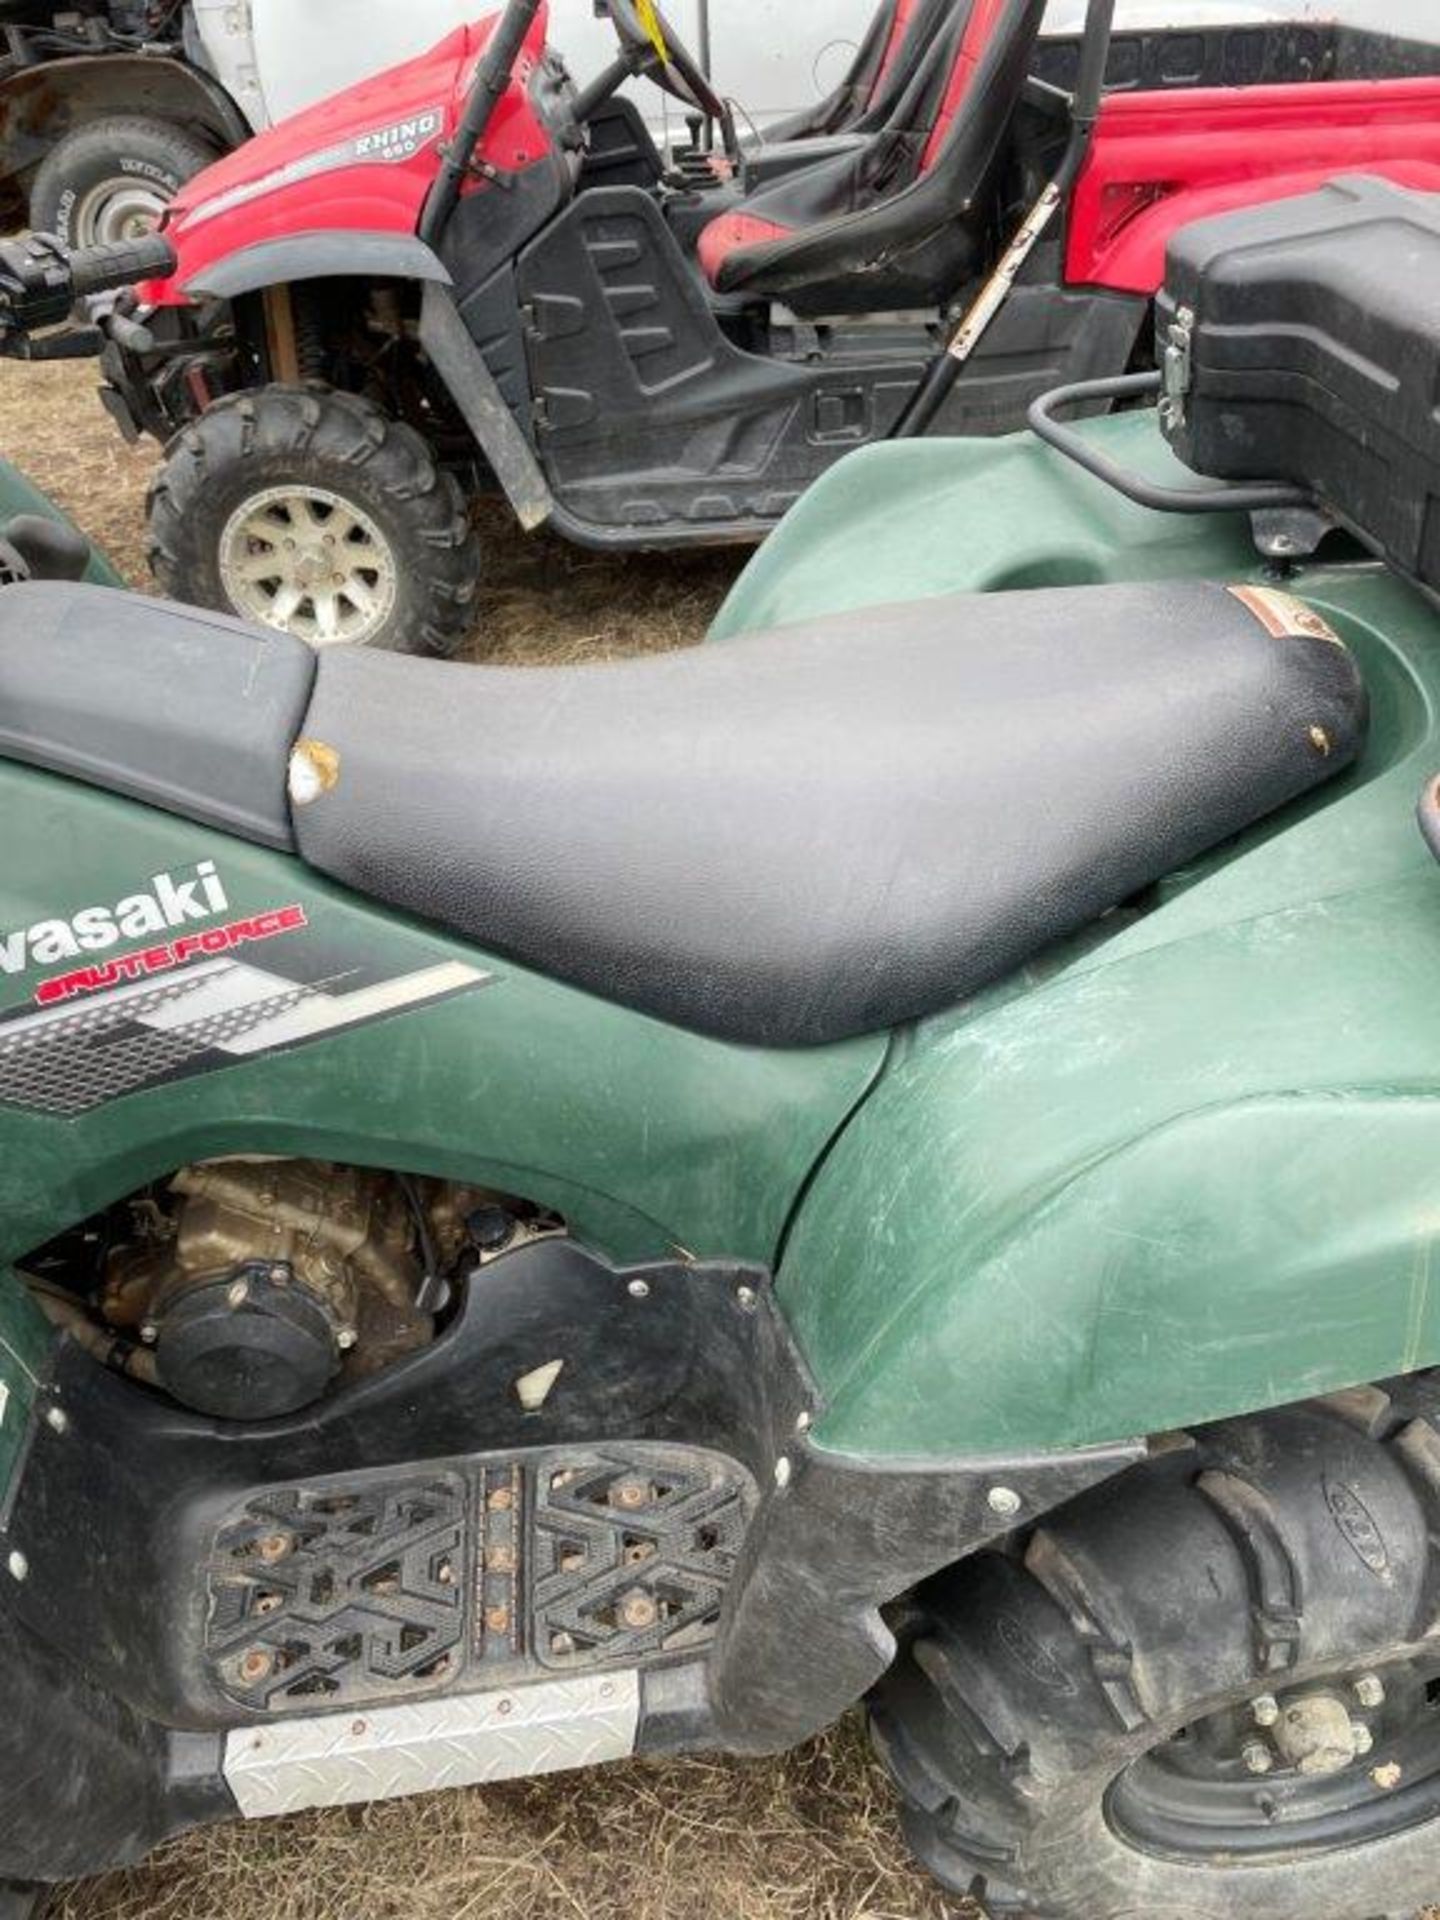 2007 KAWASAKI BRUTE FORCE 750 ATV 4X4 AUTO, RECENT CARB CLEAN, NEW BATTERY, 1762 KM'S SHOWING - Image 10 of 19